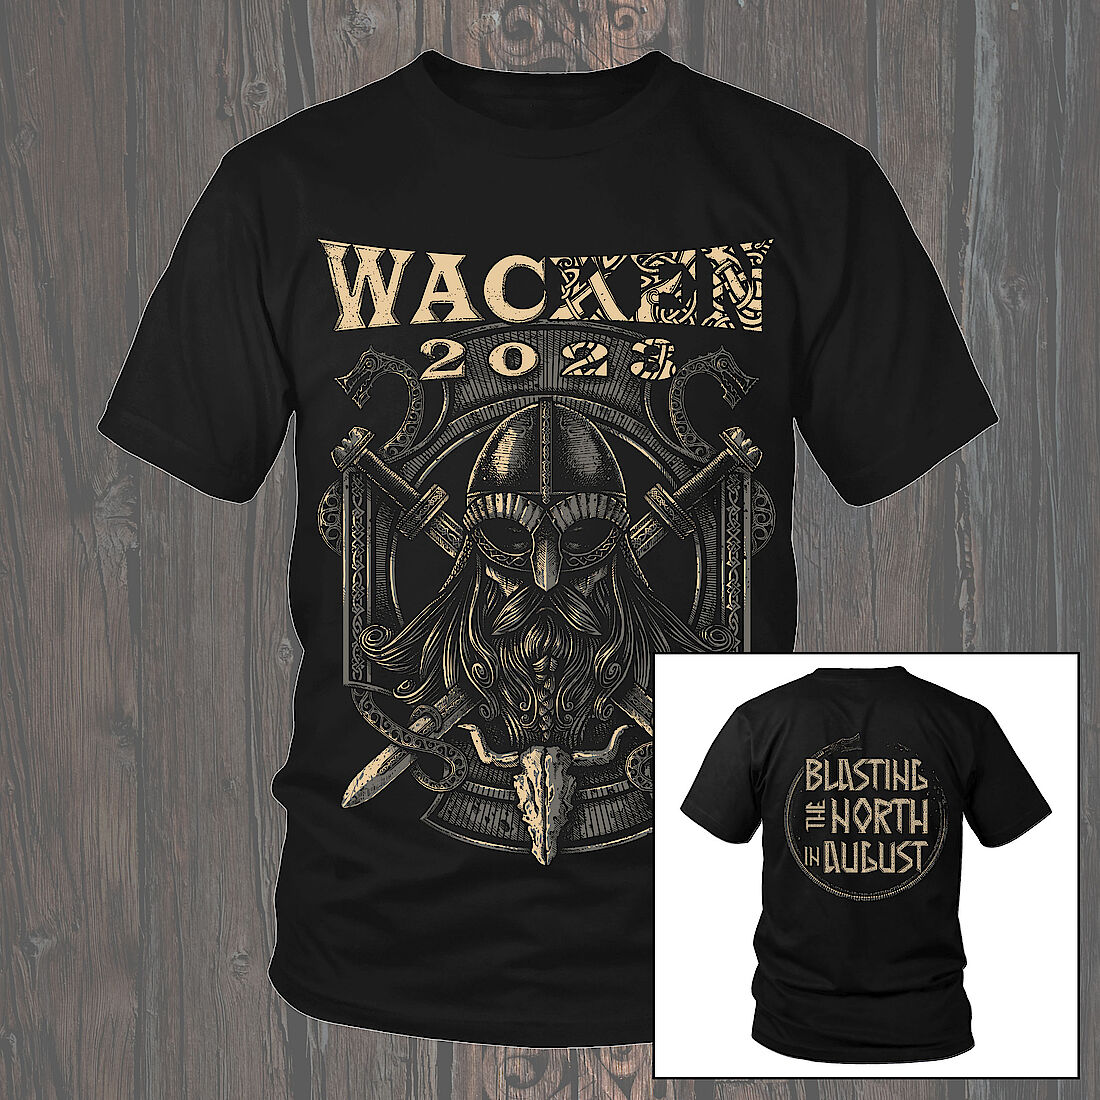 Presales for W:O:A 2023 have started! | Wacken Open Air